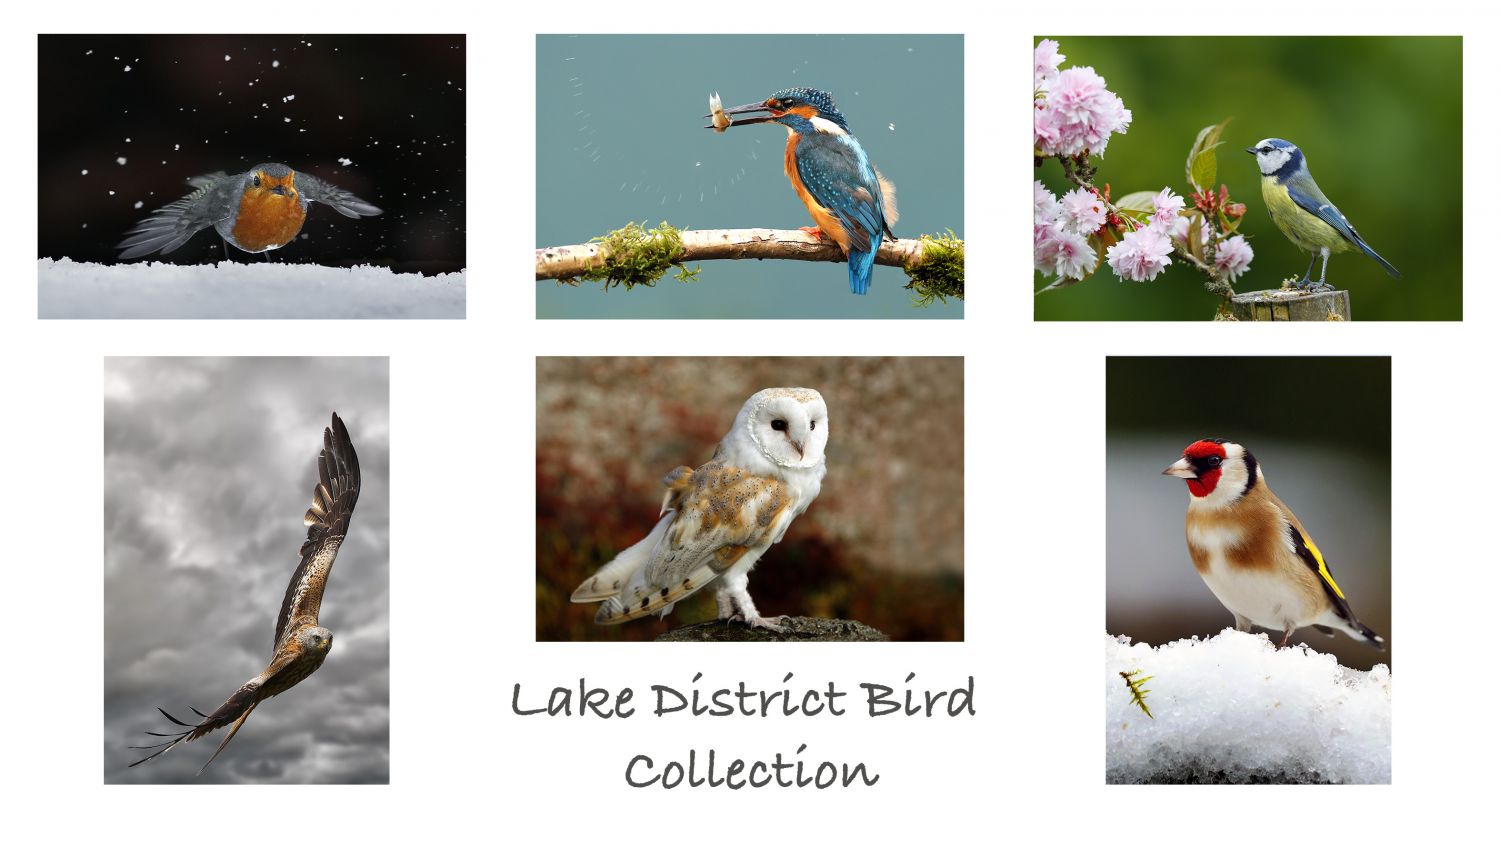 A pack of 6 assorted Lake District greeting cards featuring images of some of the beautiful birds found in the English Lake District